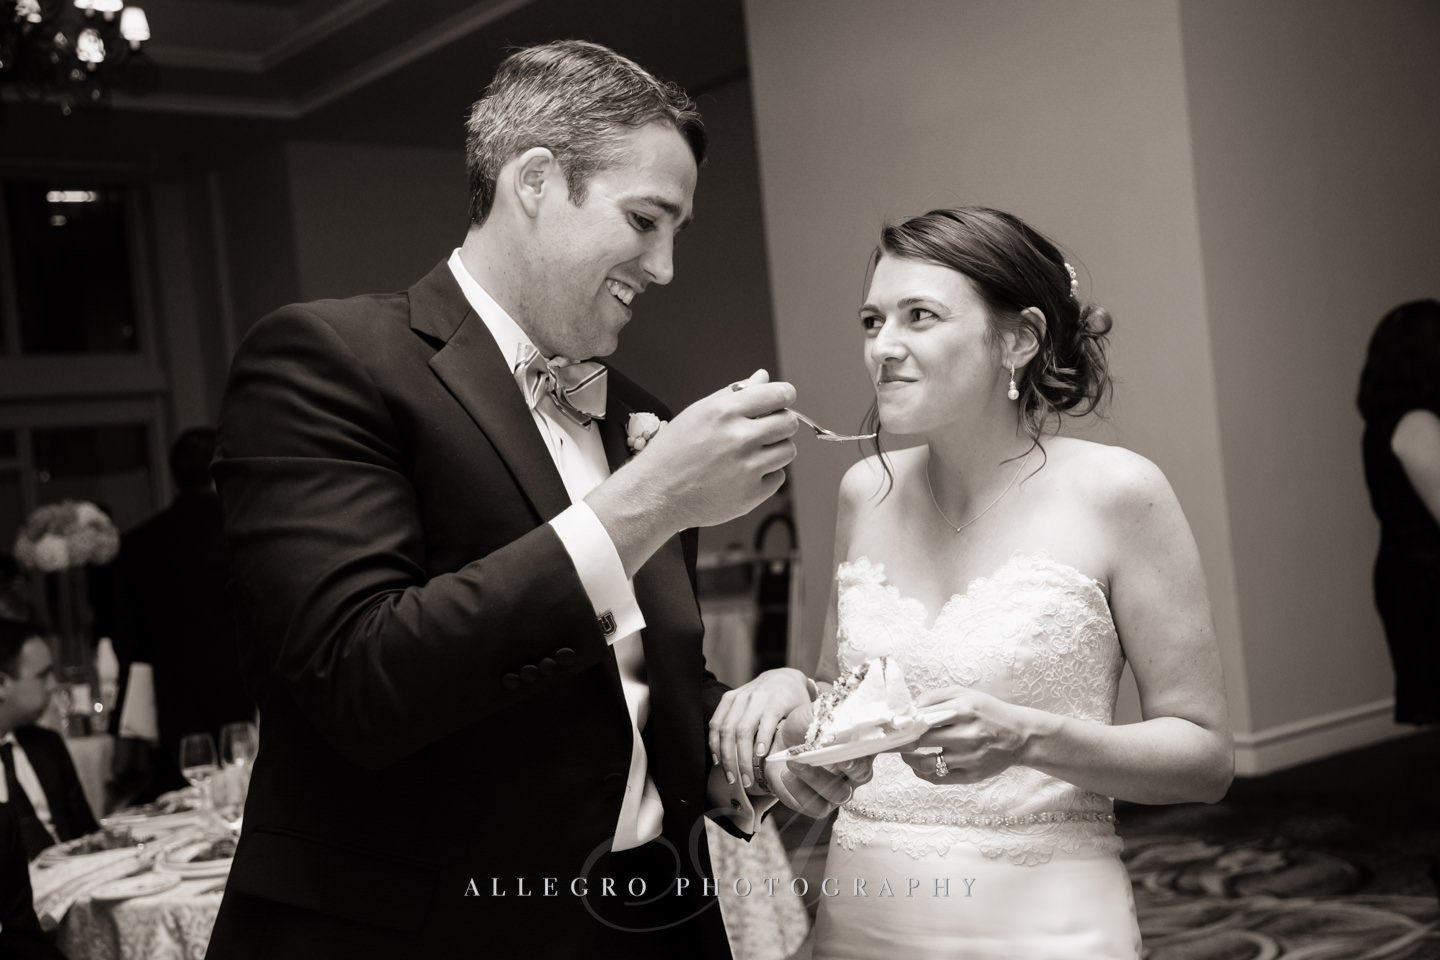 cake photo by Allegro Photography